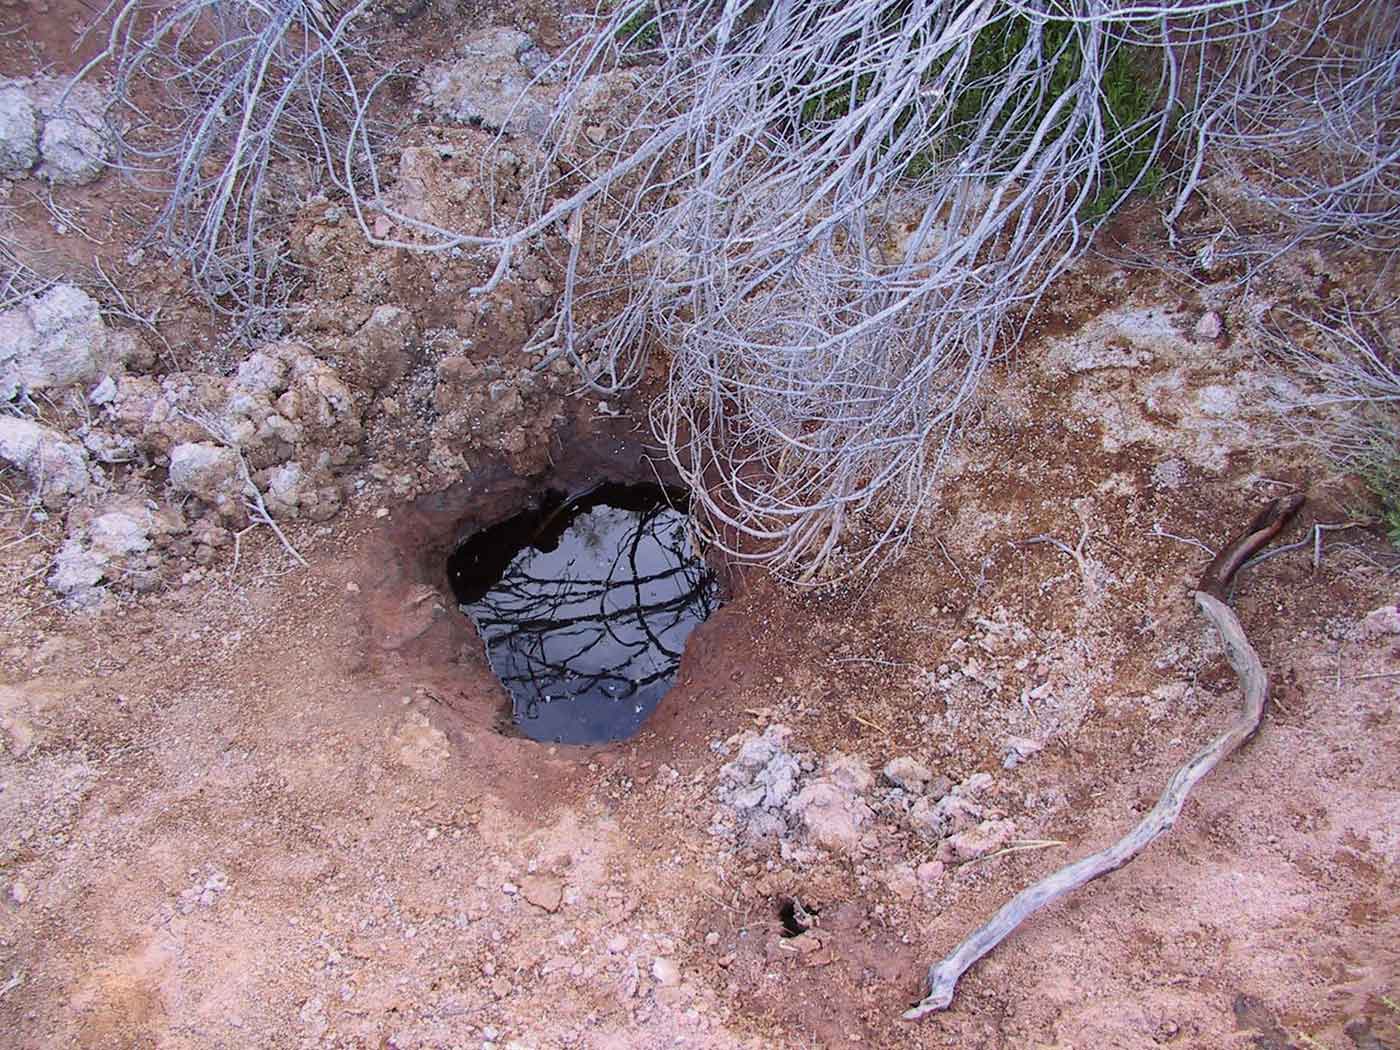 Colour photo of a hole in the ground filled with water.